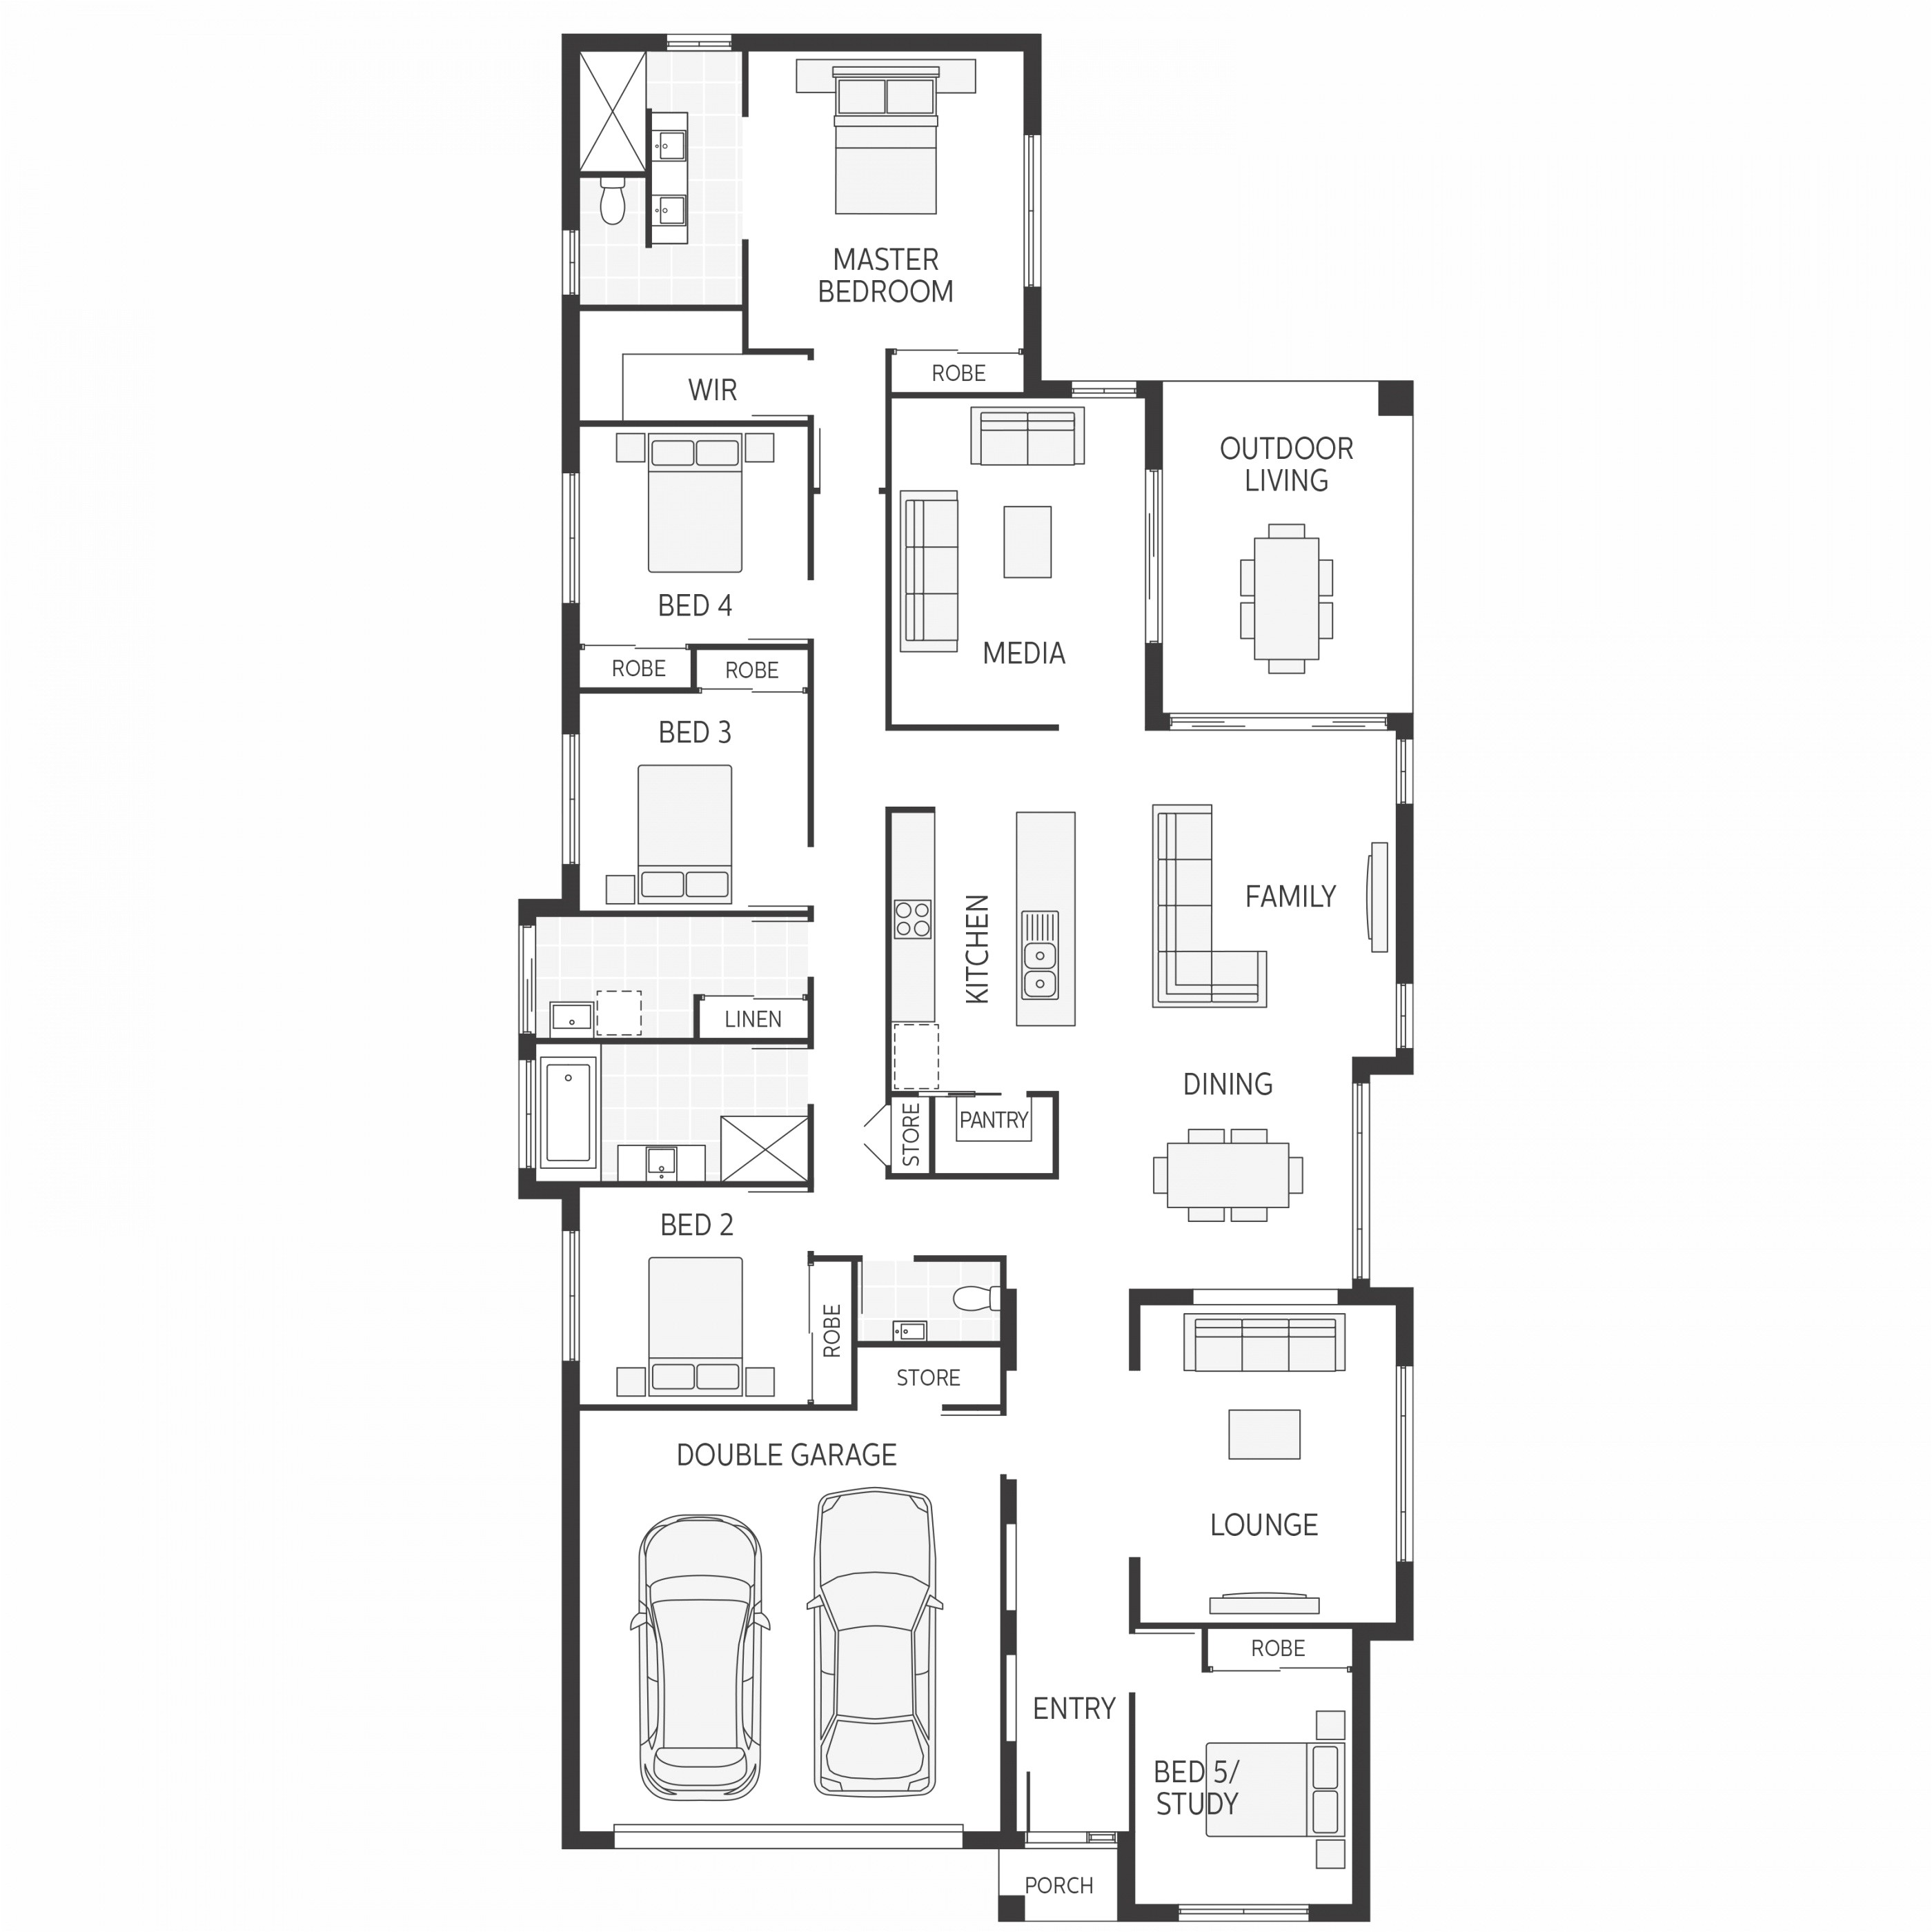 coral homes floor plans luxury coral homes daydream floor plan home decor ideas